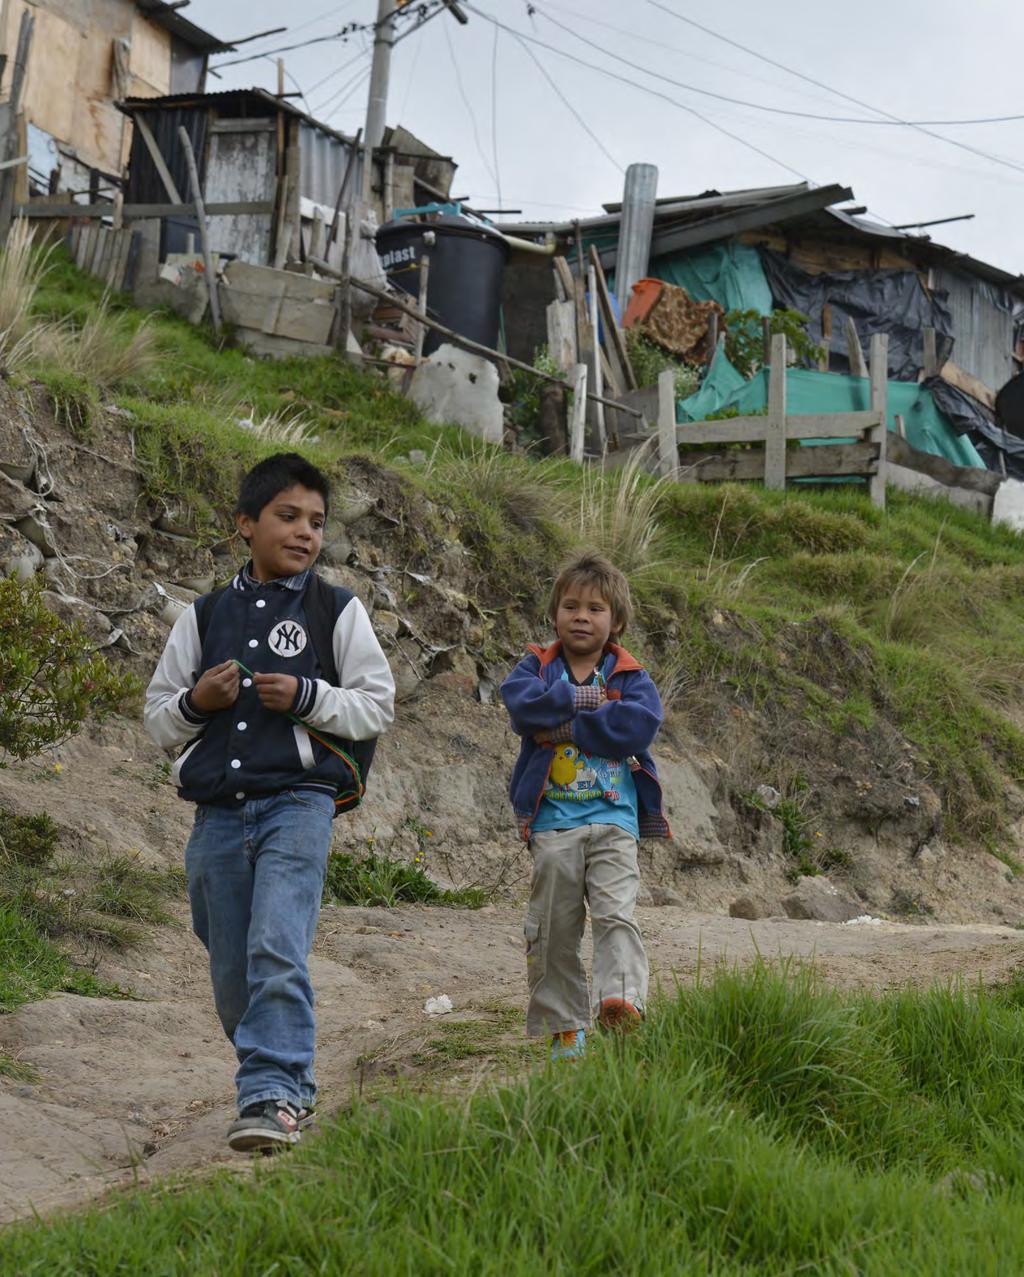 Internally displaced children walk home from the UNHCR supported educational learning centre in the outskirts of Soacha, Colombia.